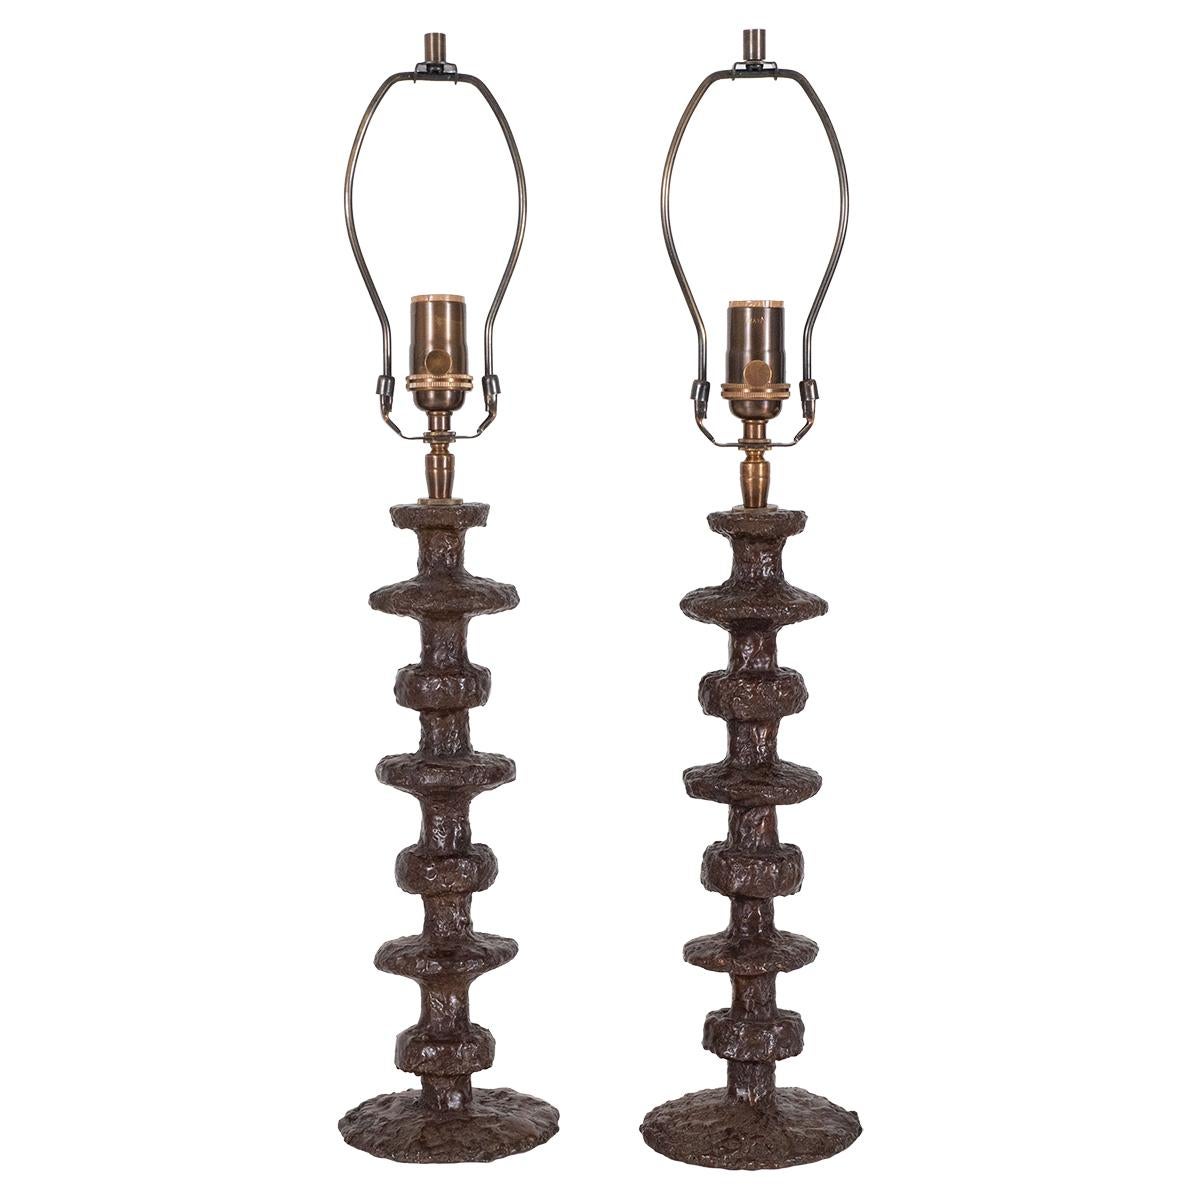 Pair of turned bronze table lamps by Claudio Gonzalez.